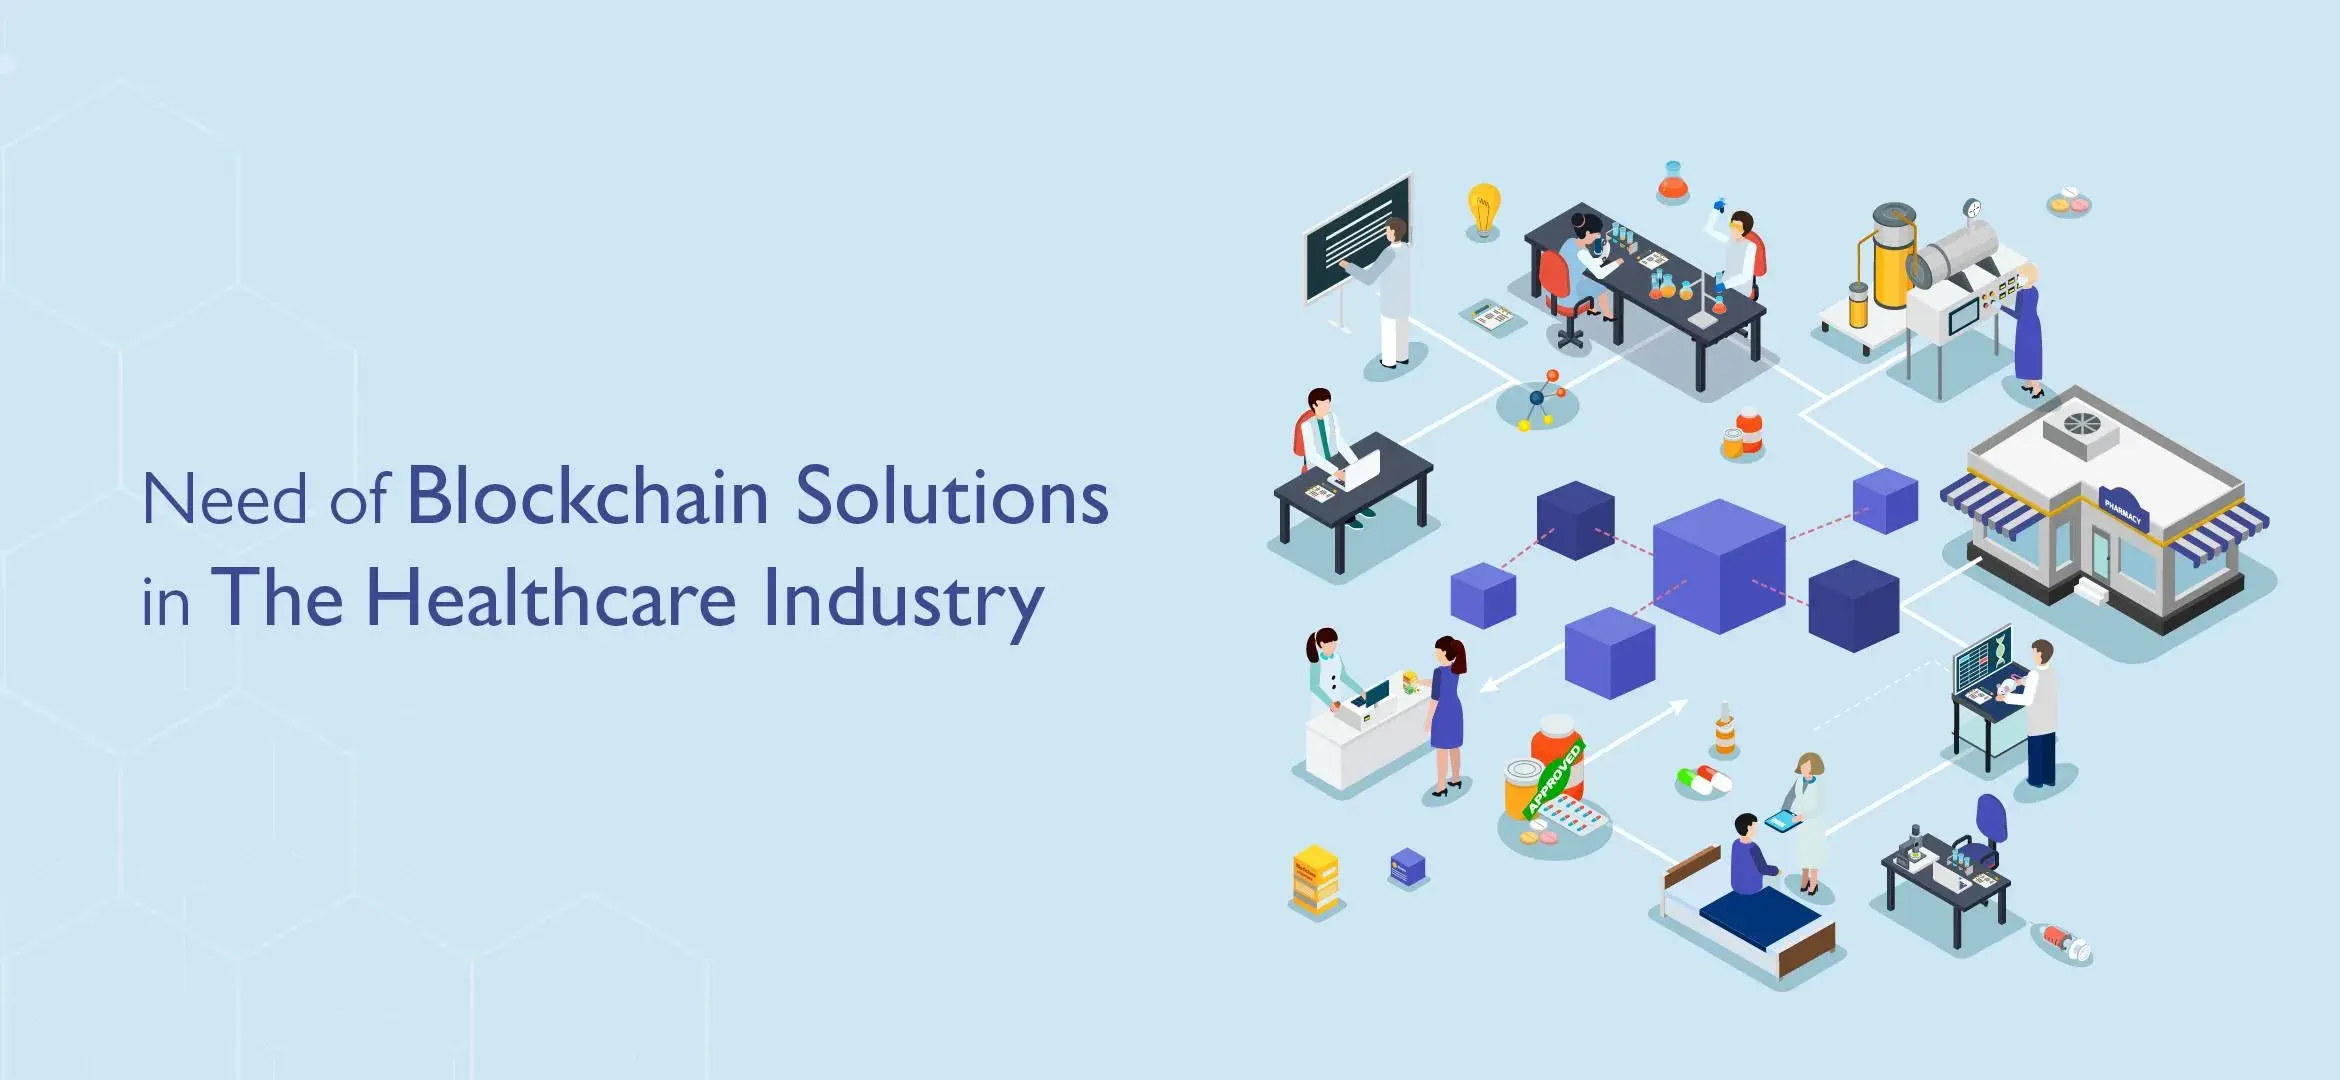 Need for Blockchain Solutions in The Healthcare Industry